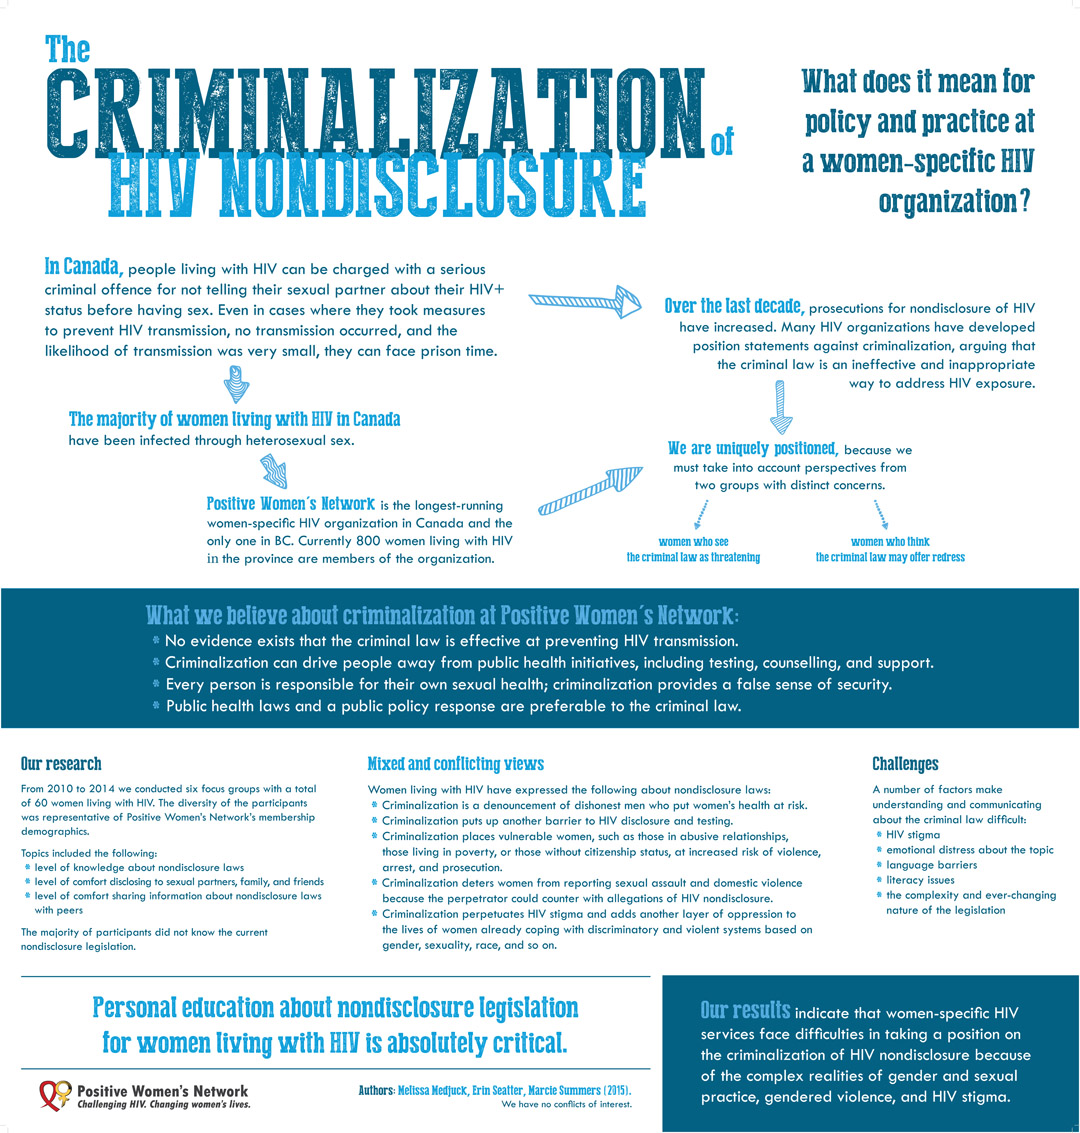 The Criminalization of HIV Nondisclosure: What Does It Mean for Policy and Practice at a Women-Specific HIV Organization? (2015)